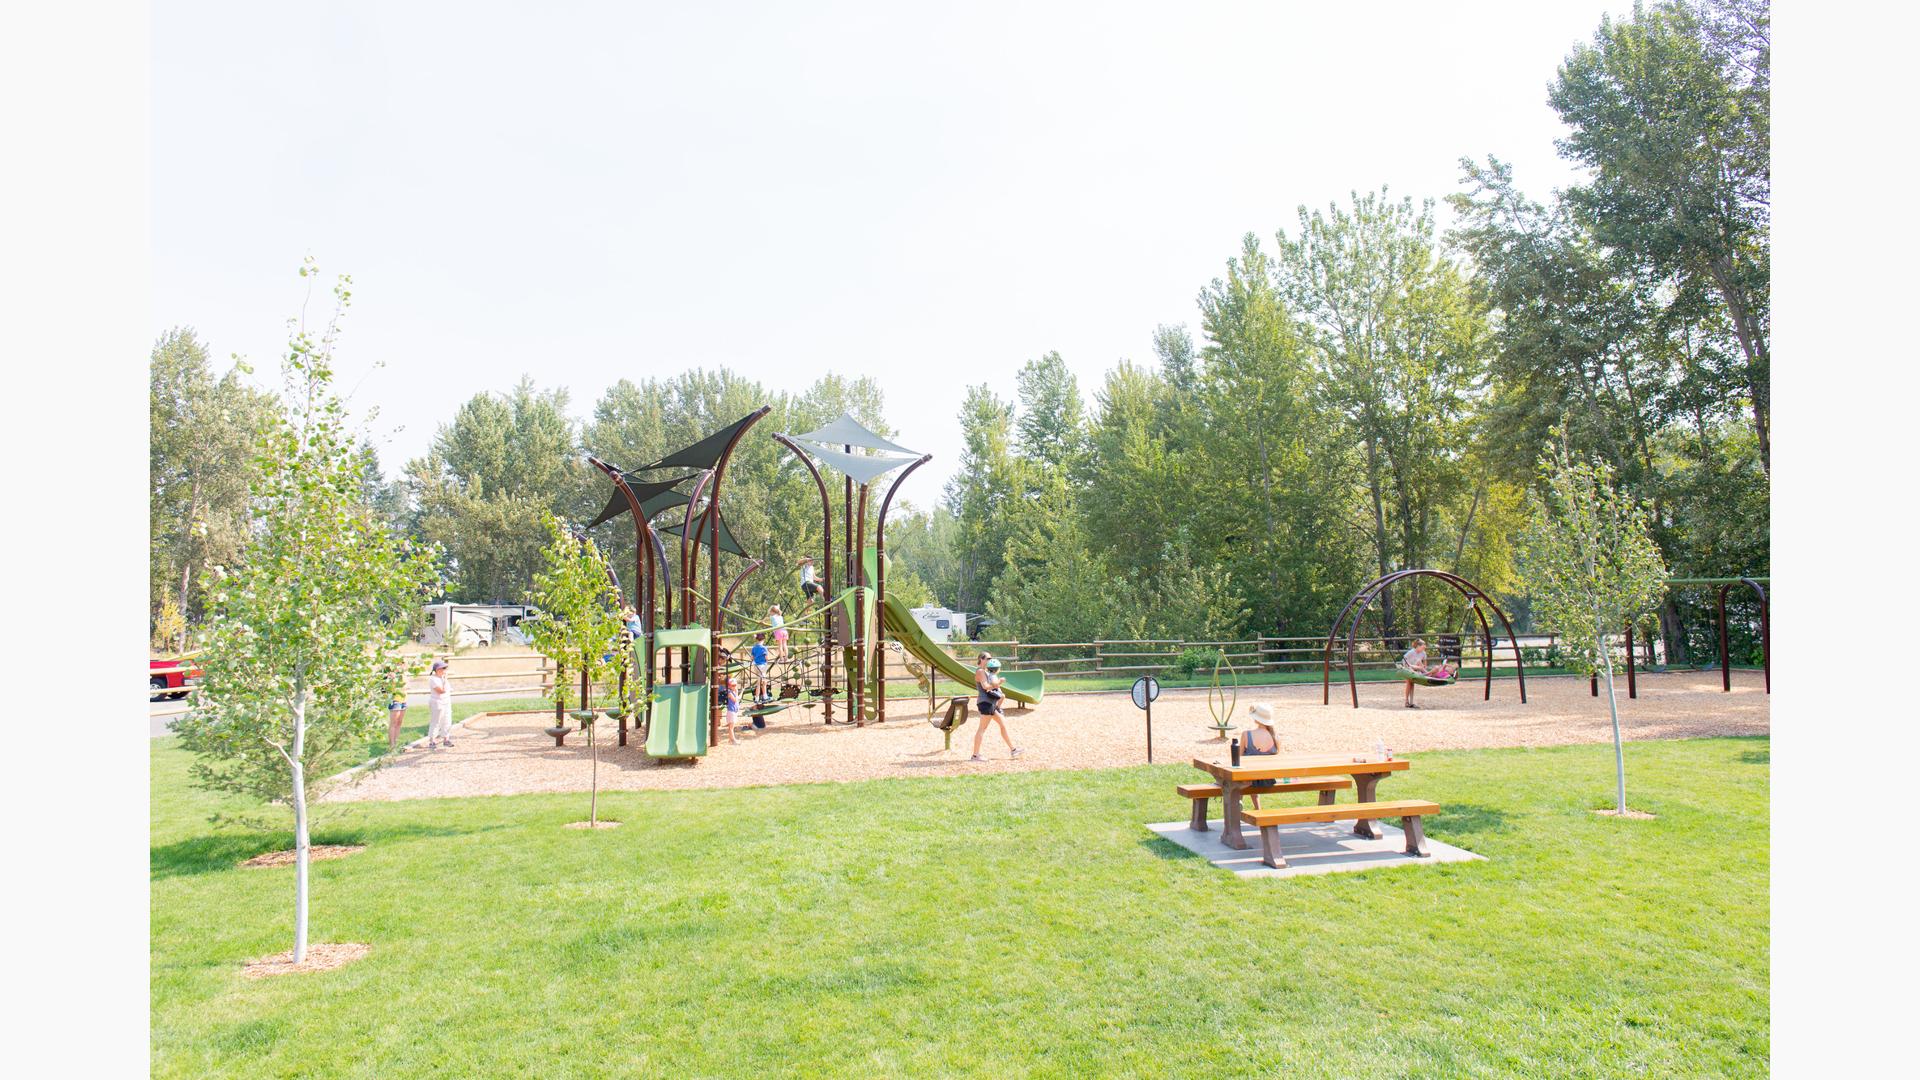 A woman sitting at a picnic table watches as children play all over a tree inspired designed playground.